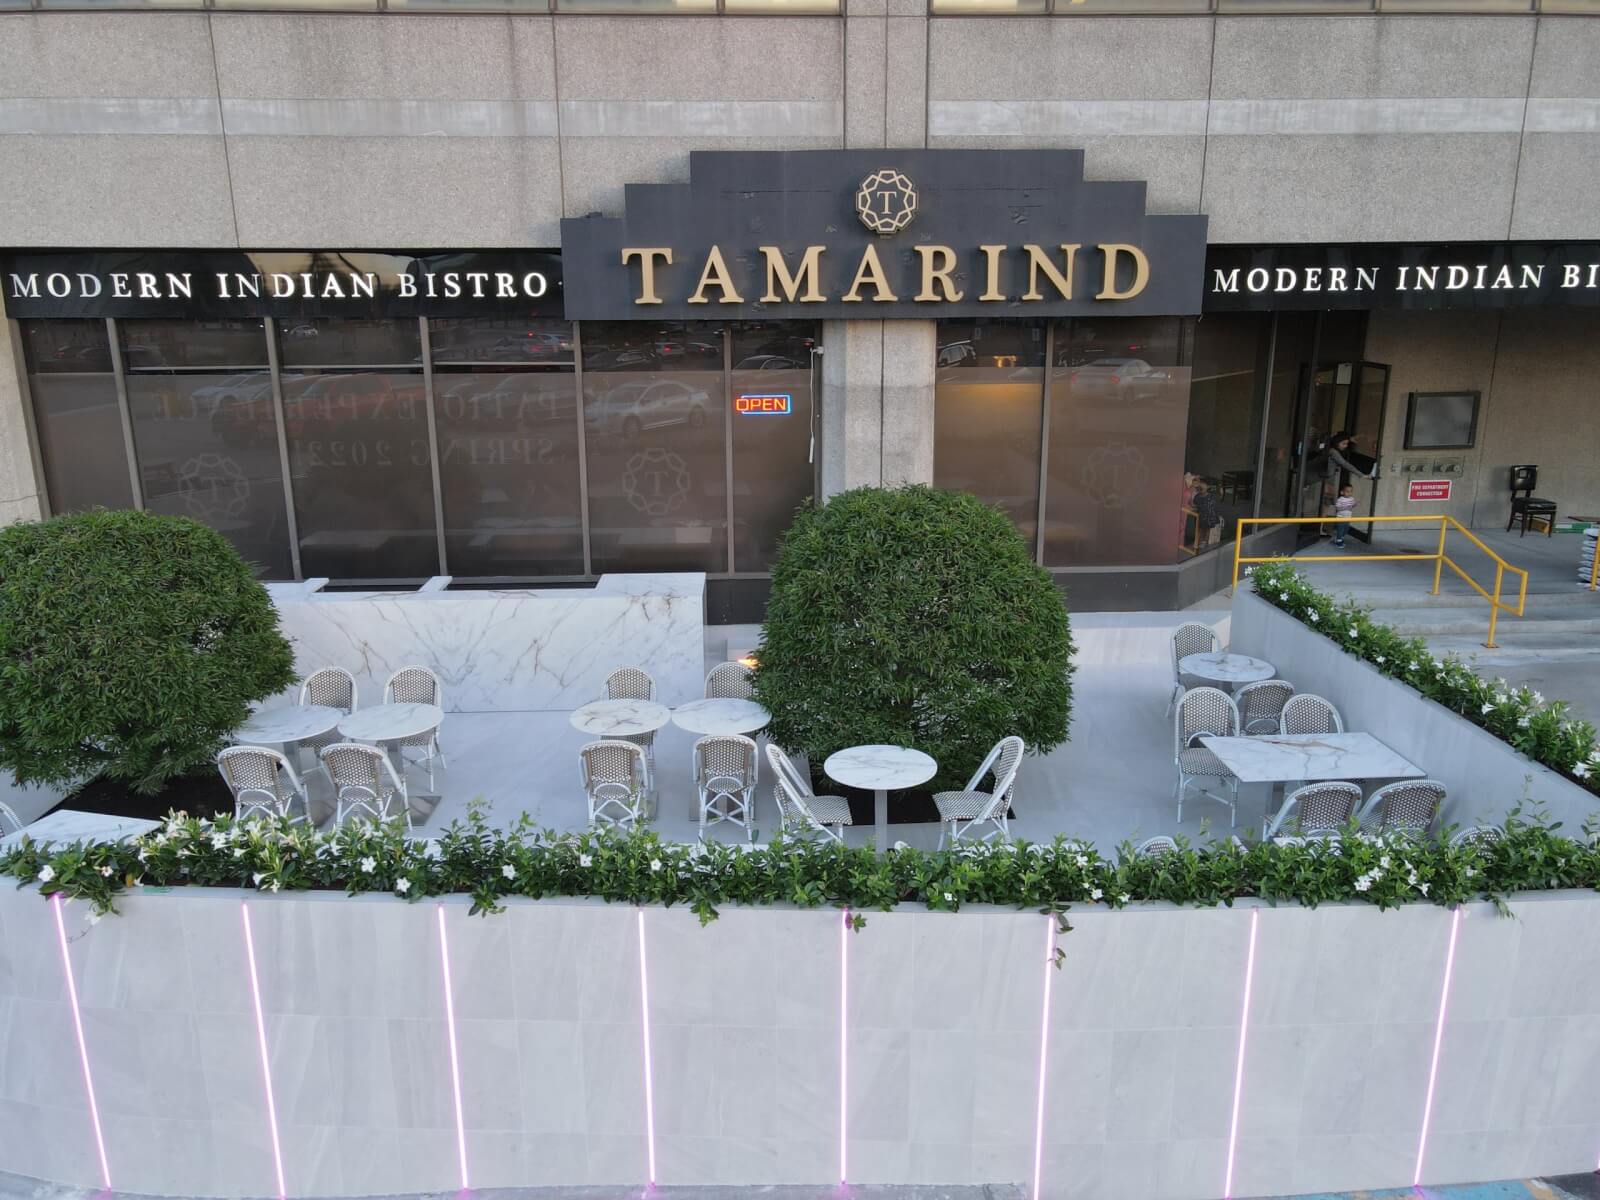 Tamarind Indian Bistro Takes Modern Fusion Cuisine To The Next Level: Excellent restaurant with an incredible menu.